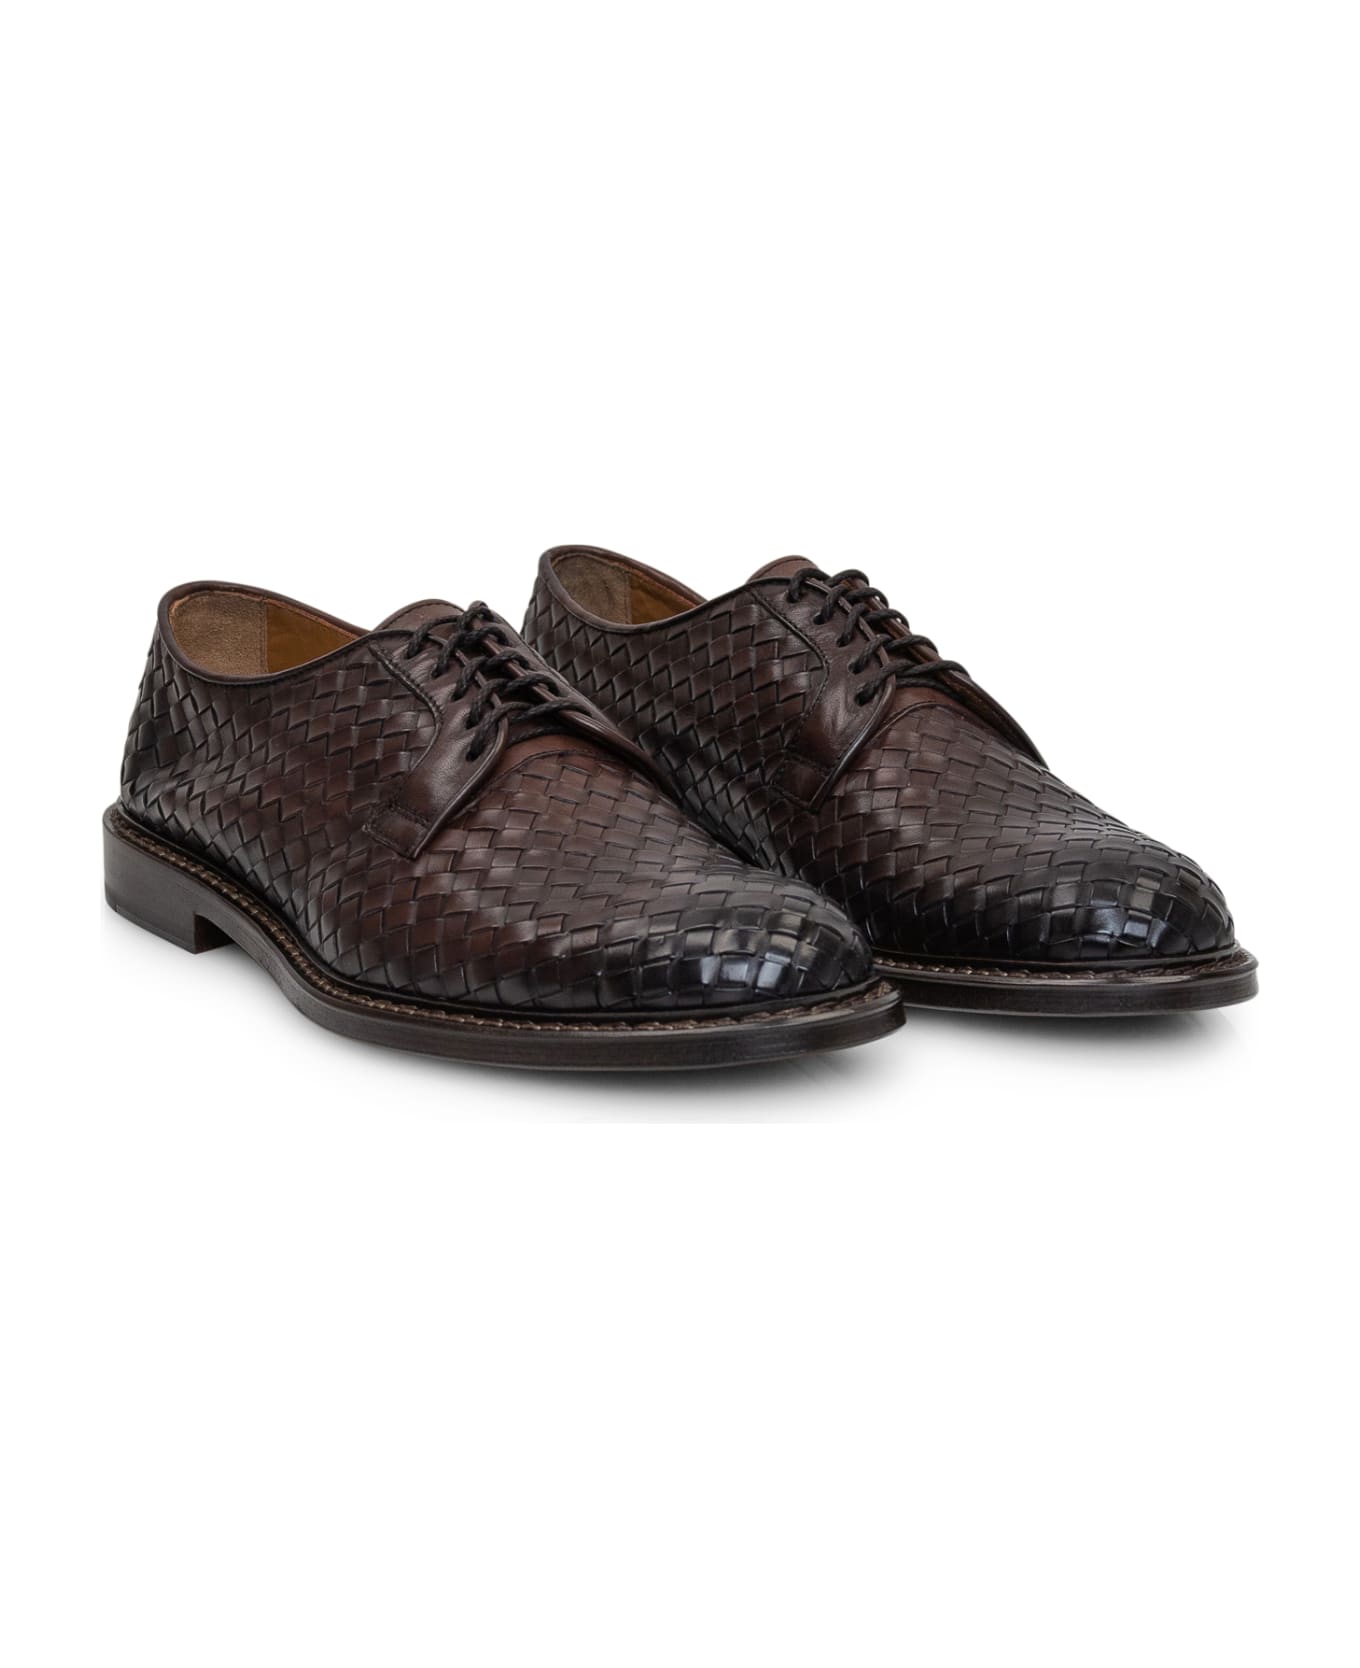 Doucal's Derby Woven Lace-up - FDO T.MORO